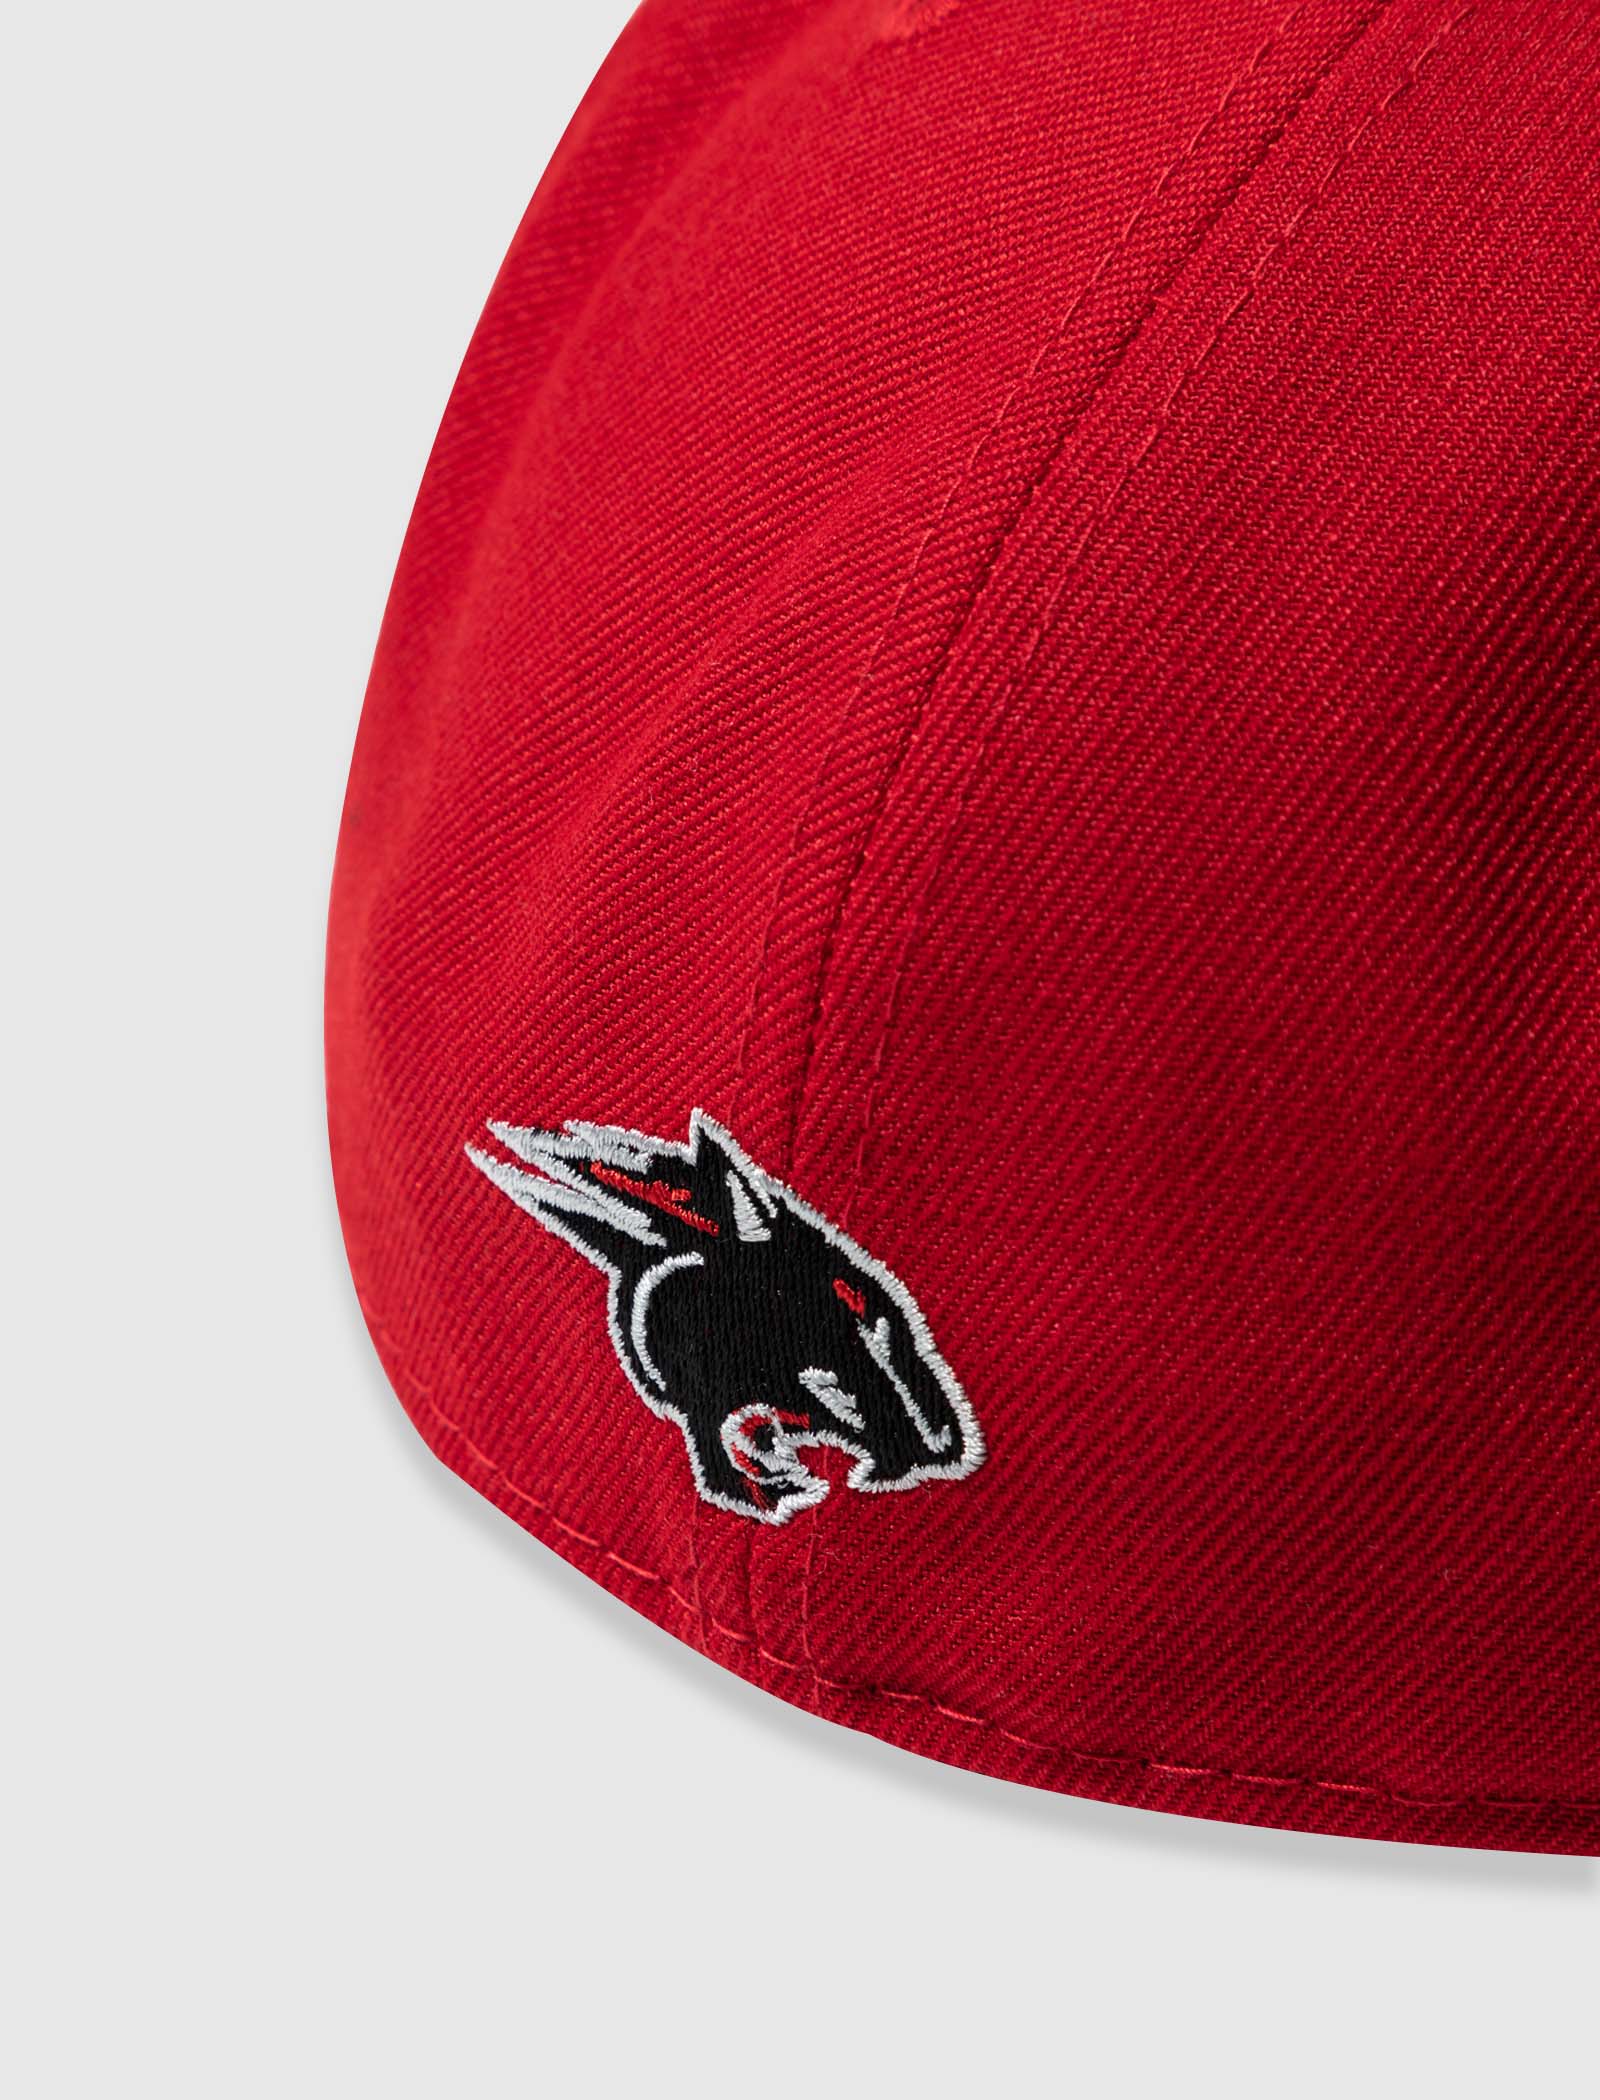 CLARK PANTHERS FITTED HAT